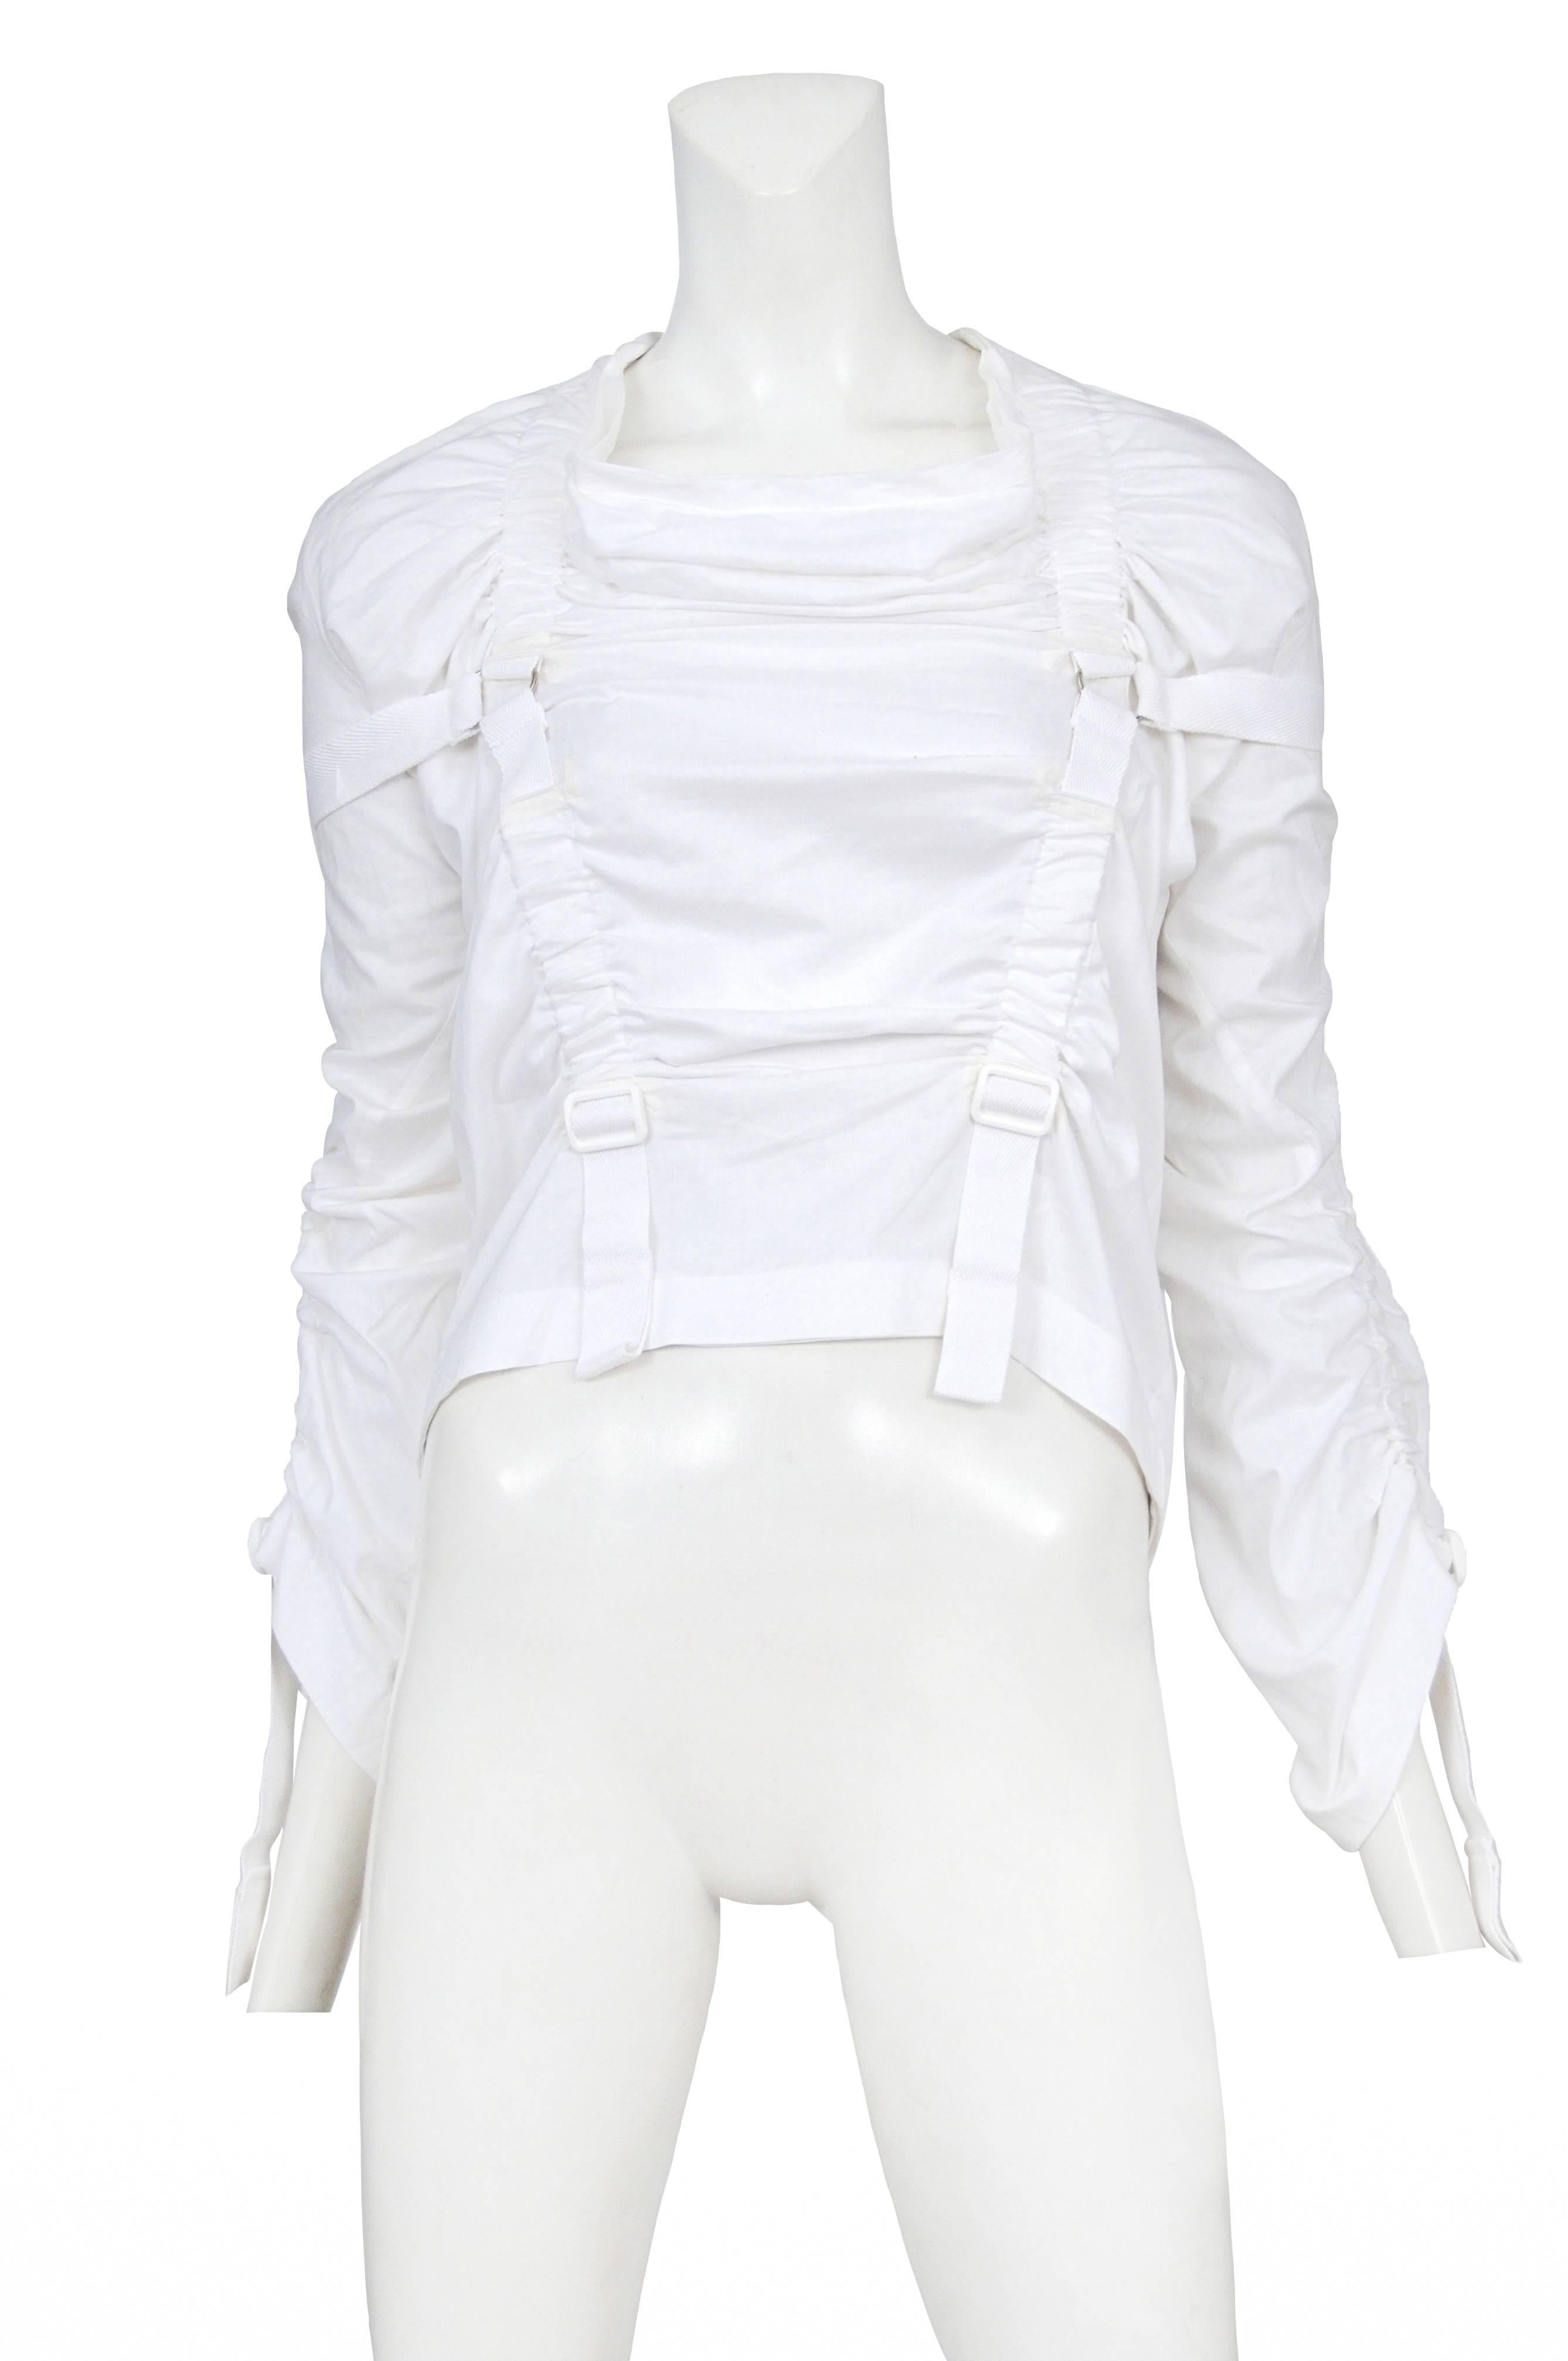 Vintage Junya Watanabe white cotton long sleeve parachute top. Circa 2003.
Please inquire for additional images.